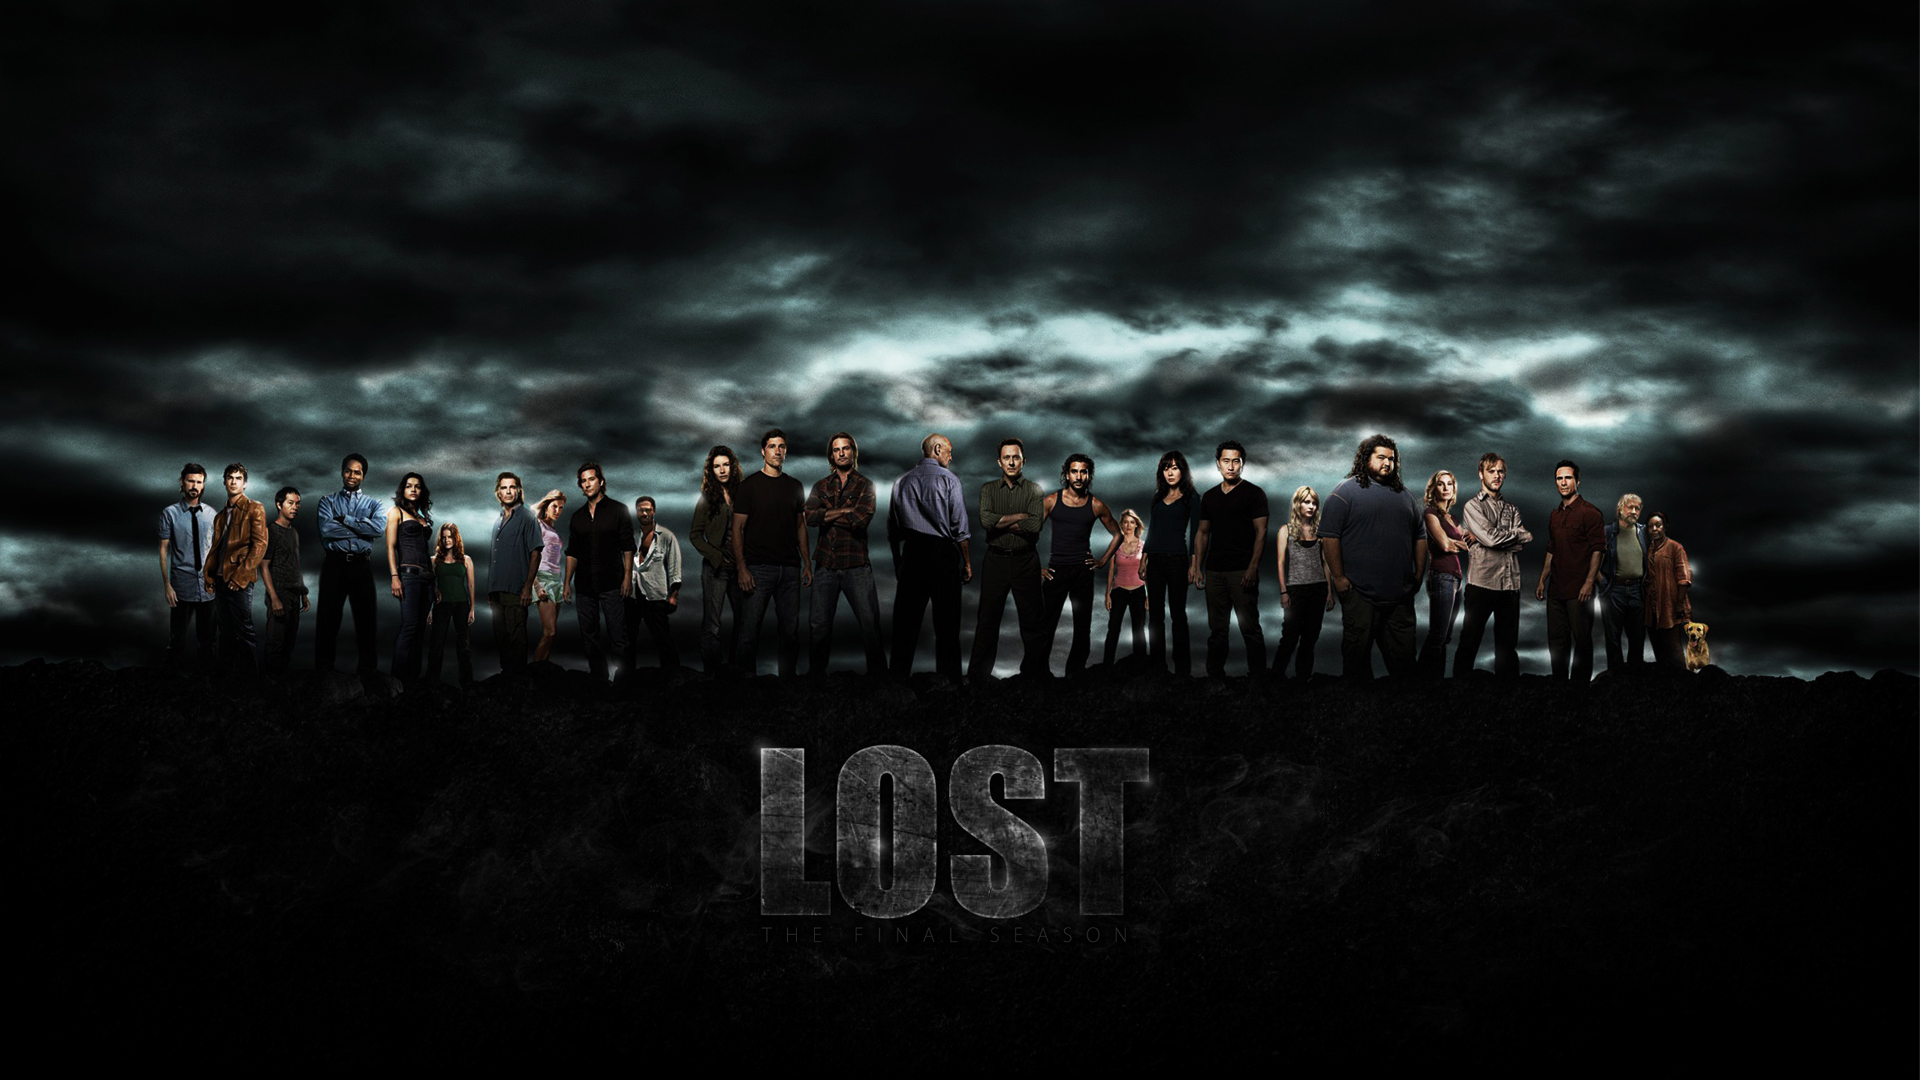 Lost Wallpaper Hebus Org High Definition